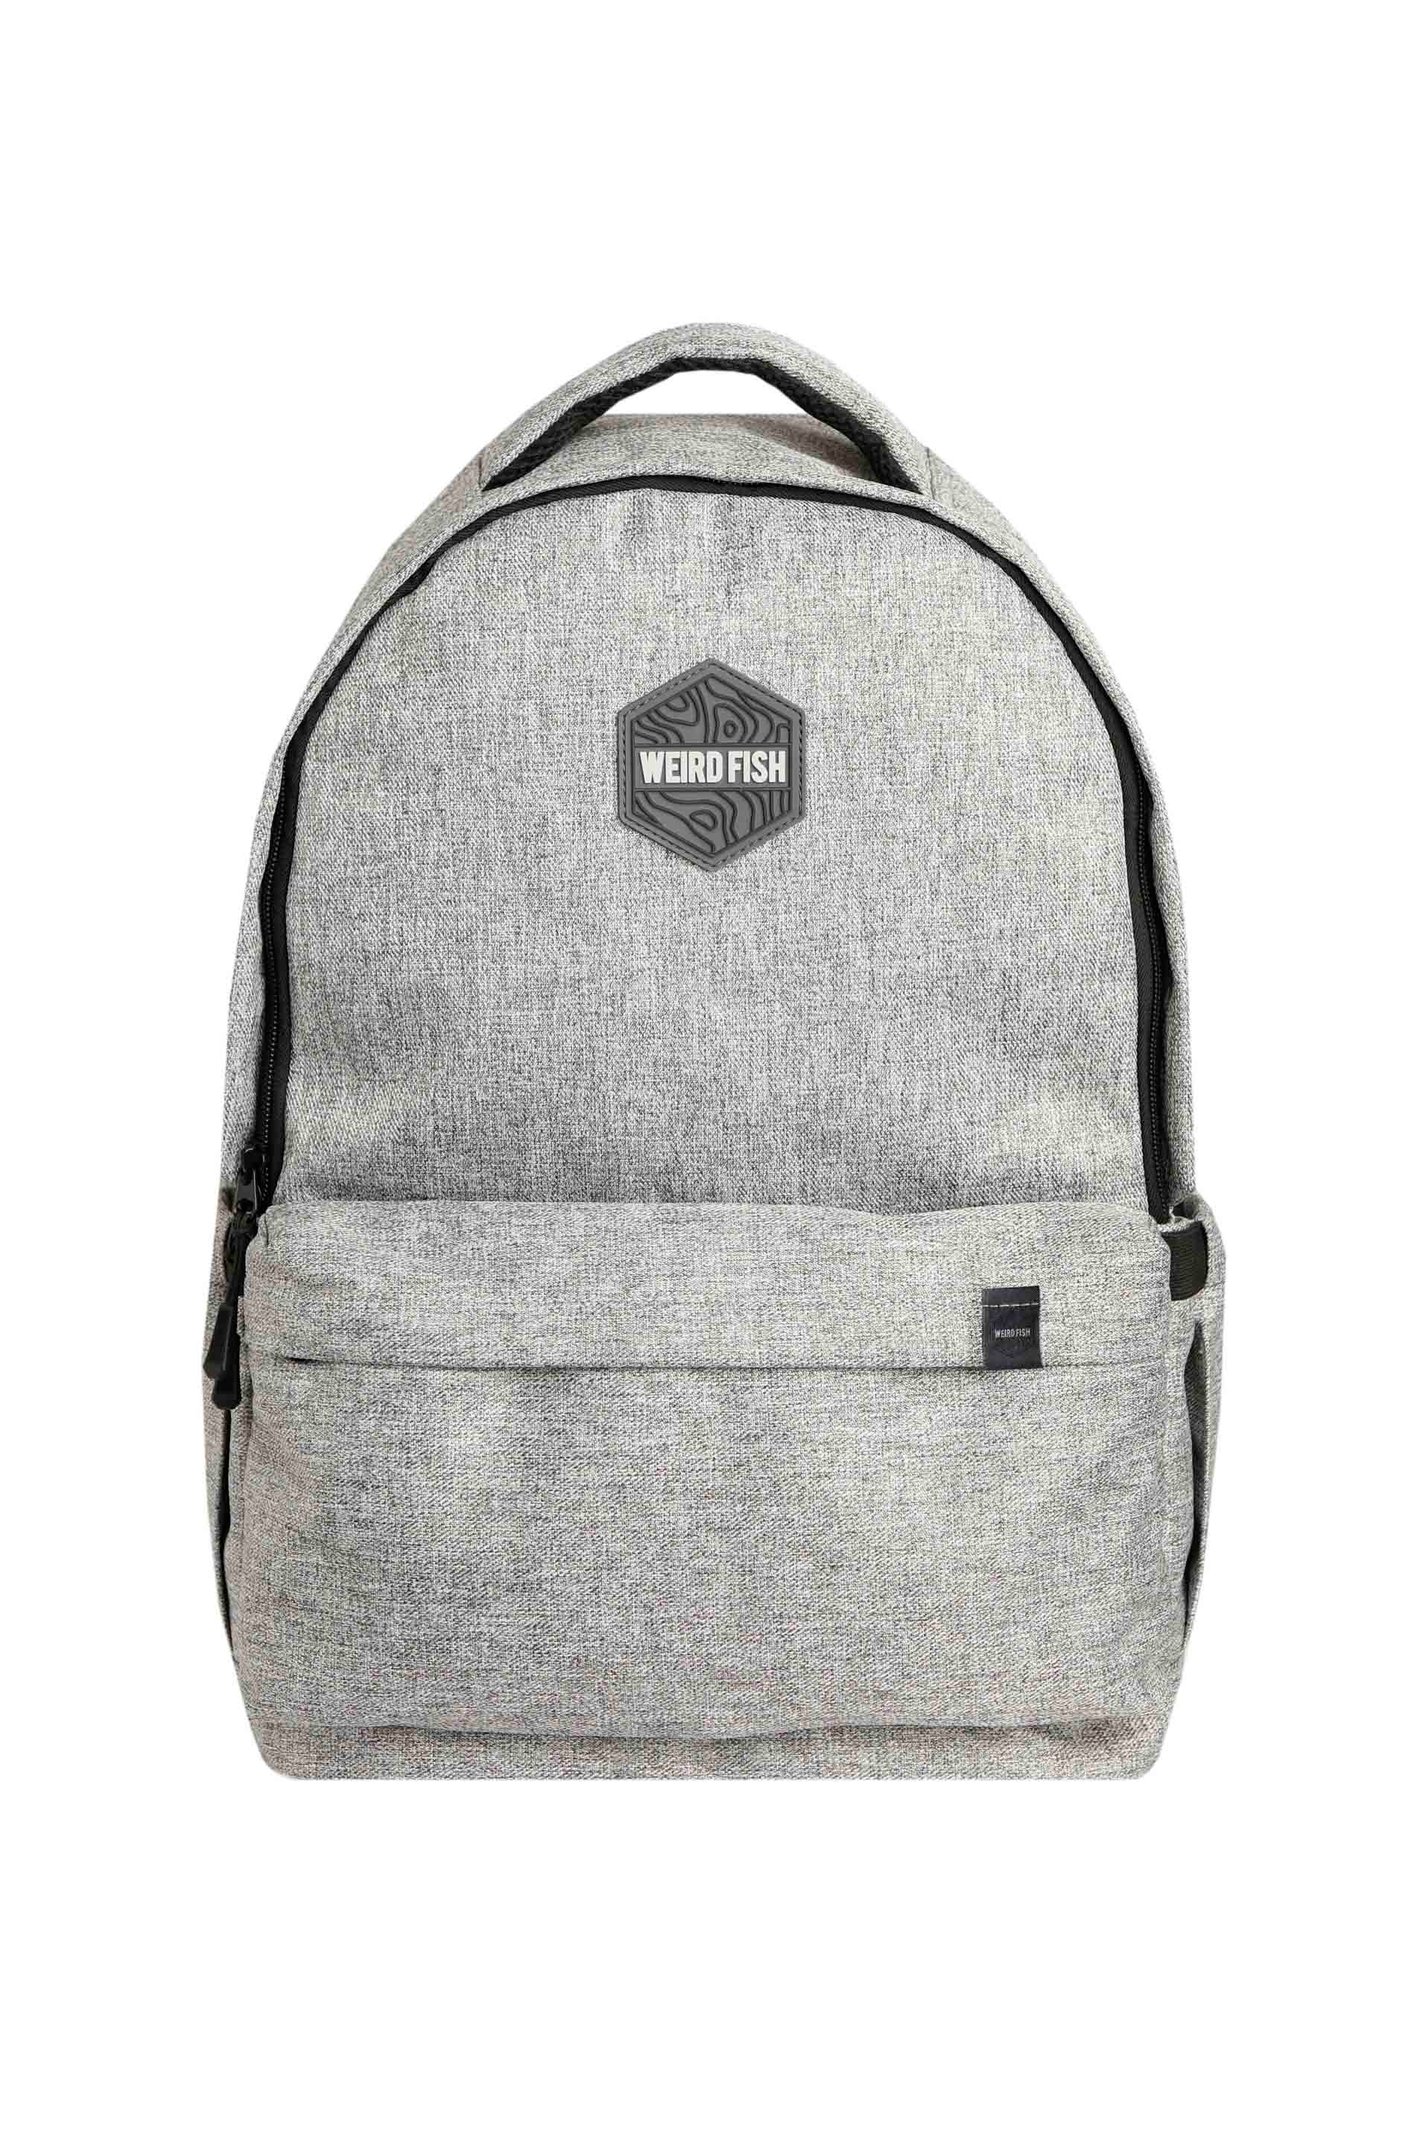 Weird Fish Nevis Backpack Grey Size ONE